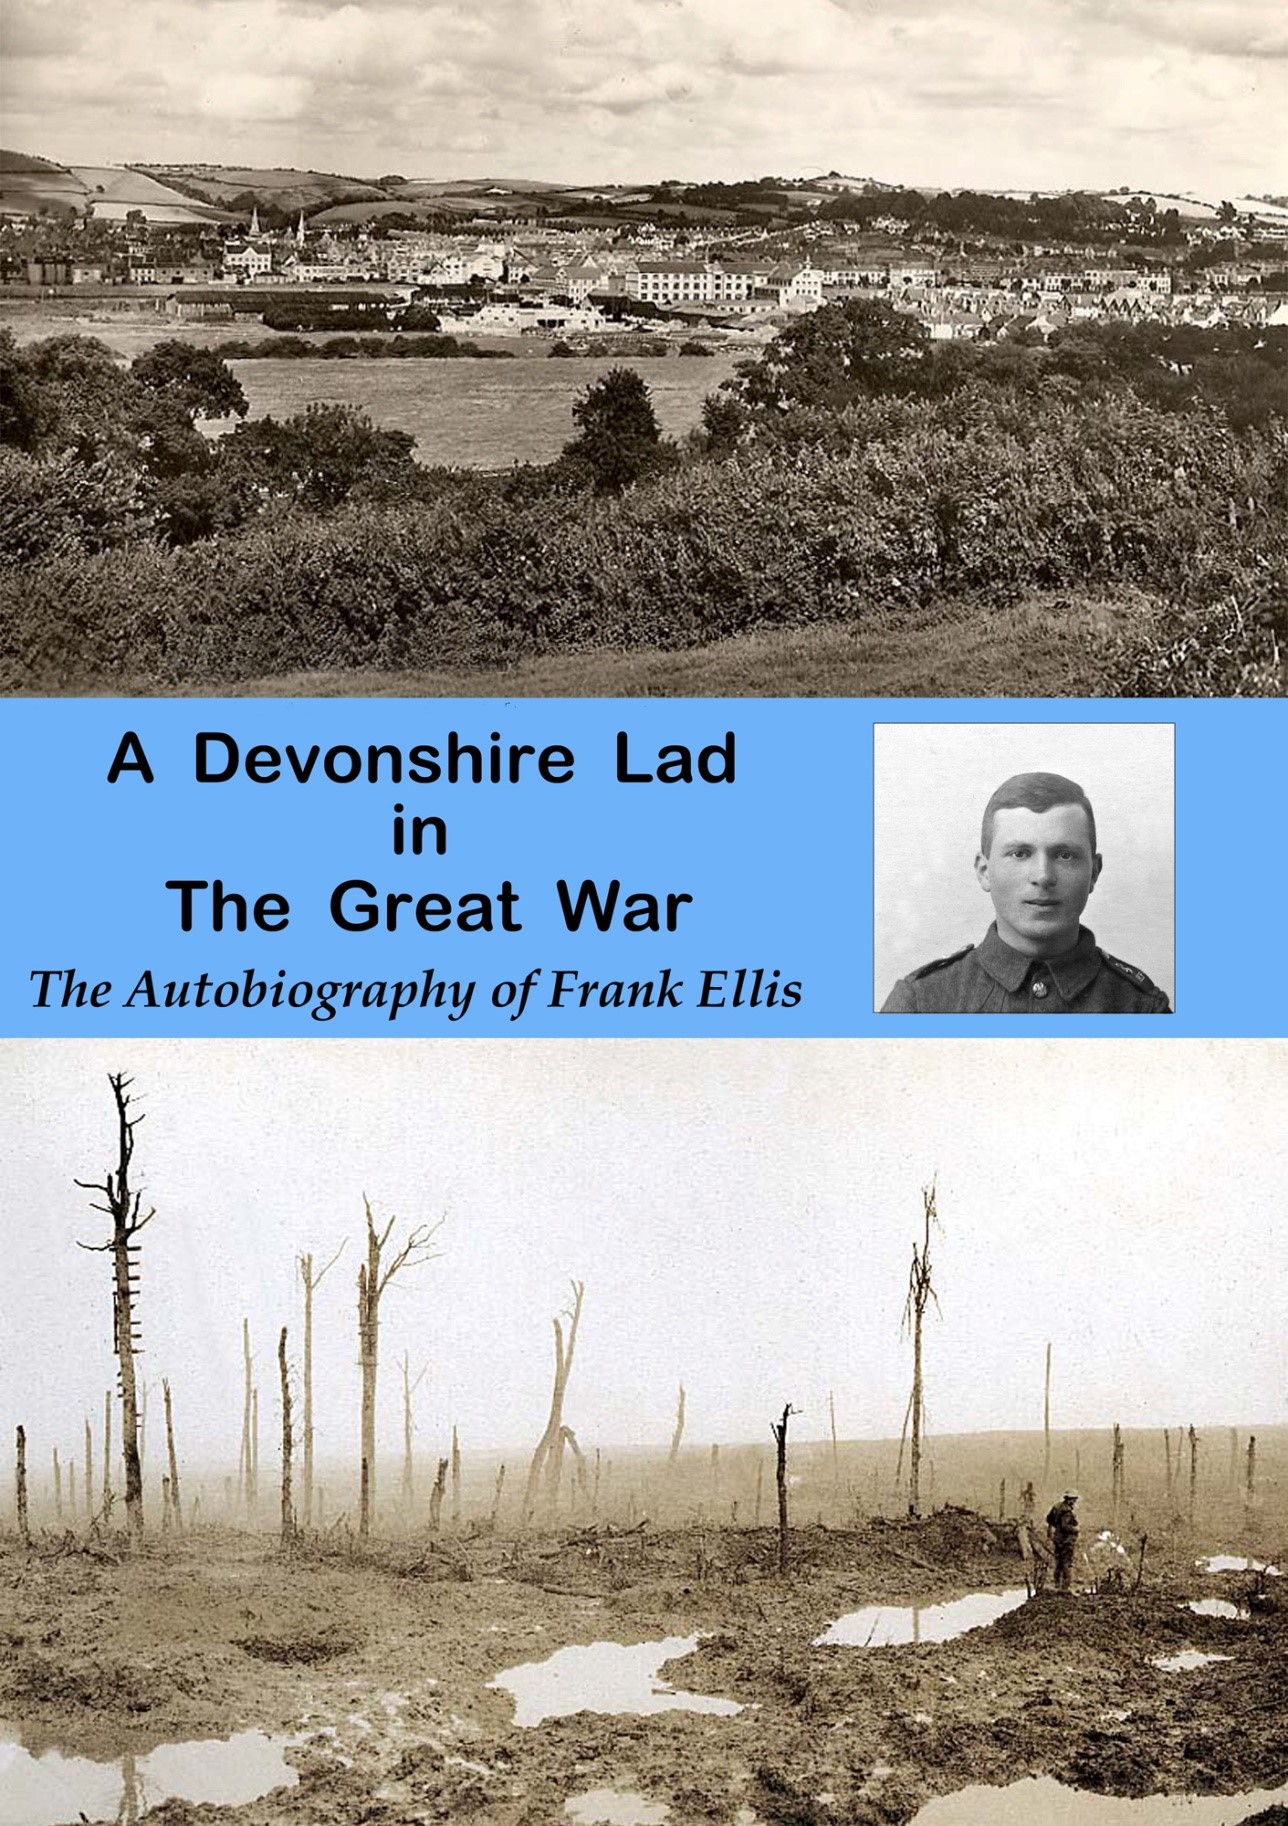 A Devonshire Lad in the Great War, Autobiography of Frank Ellis